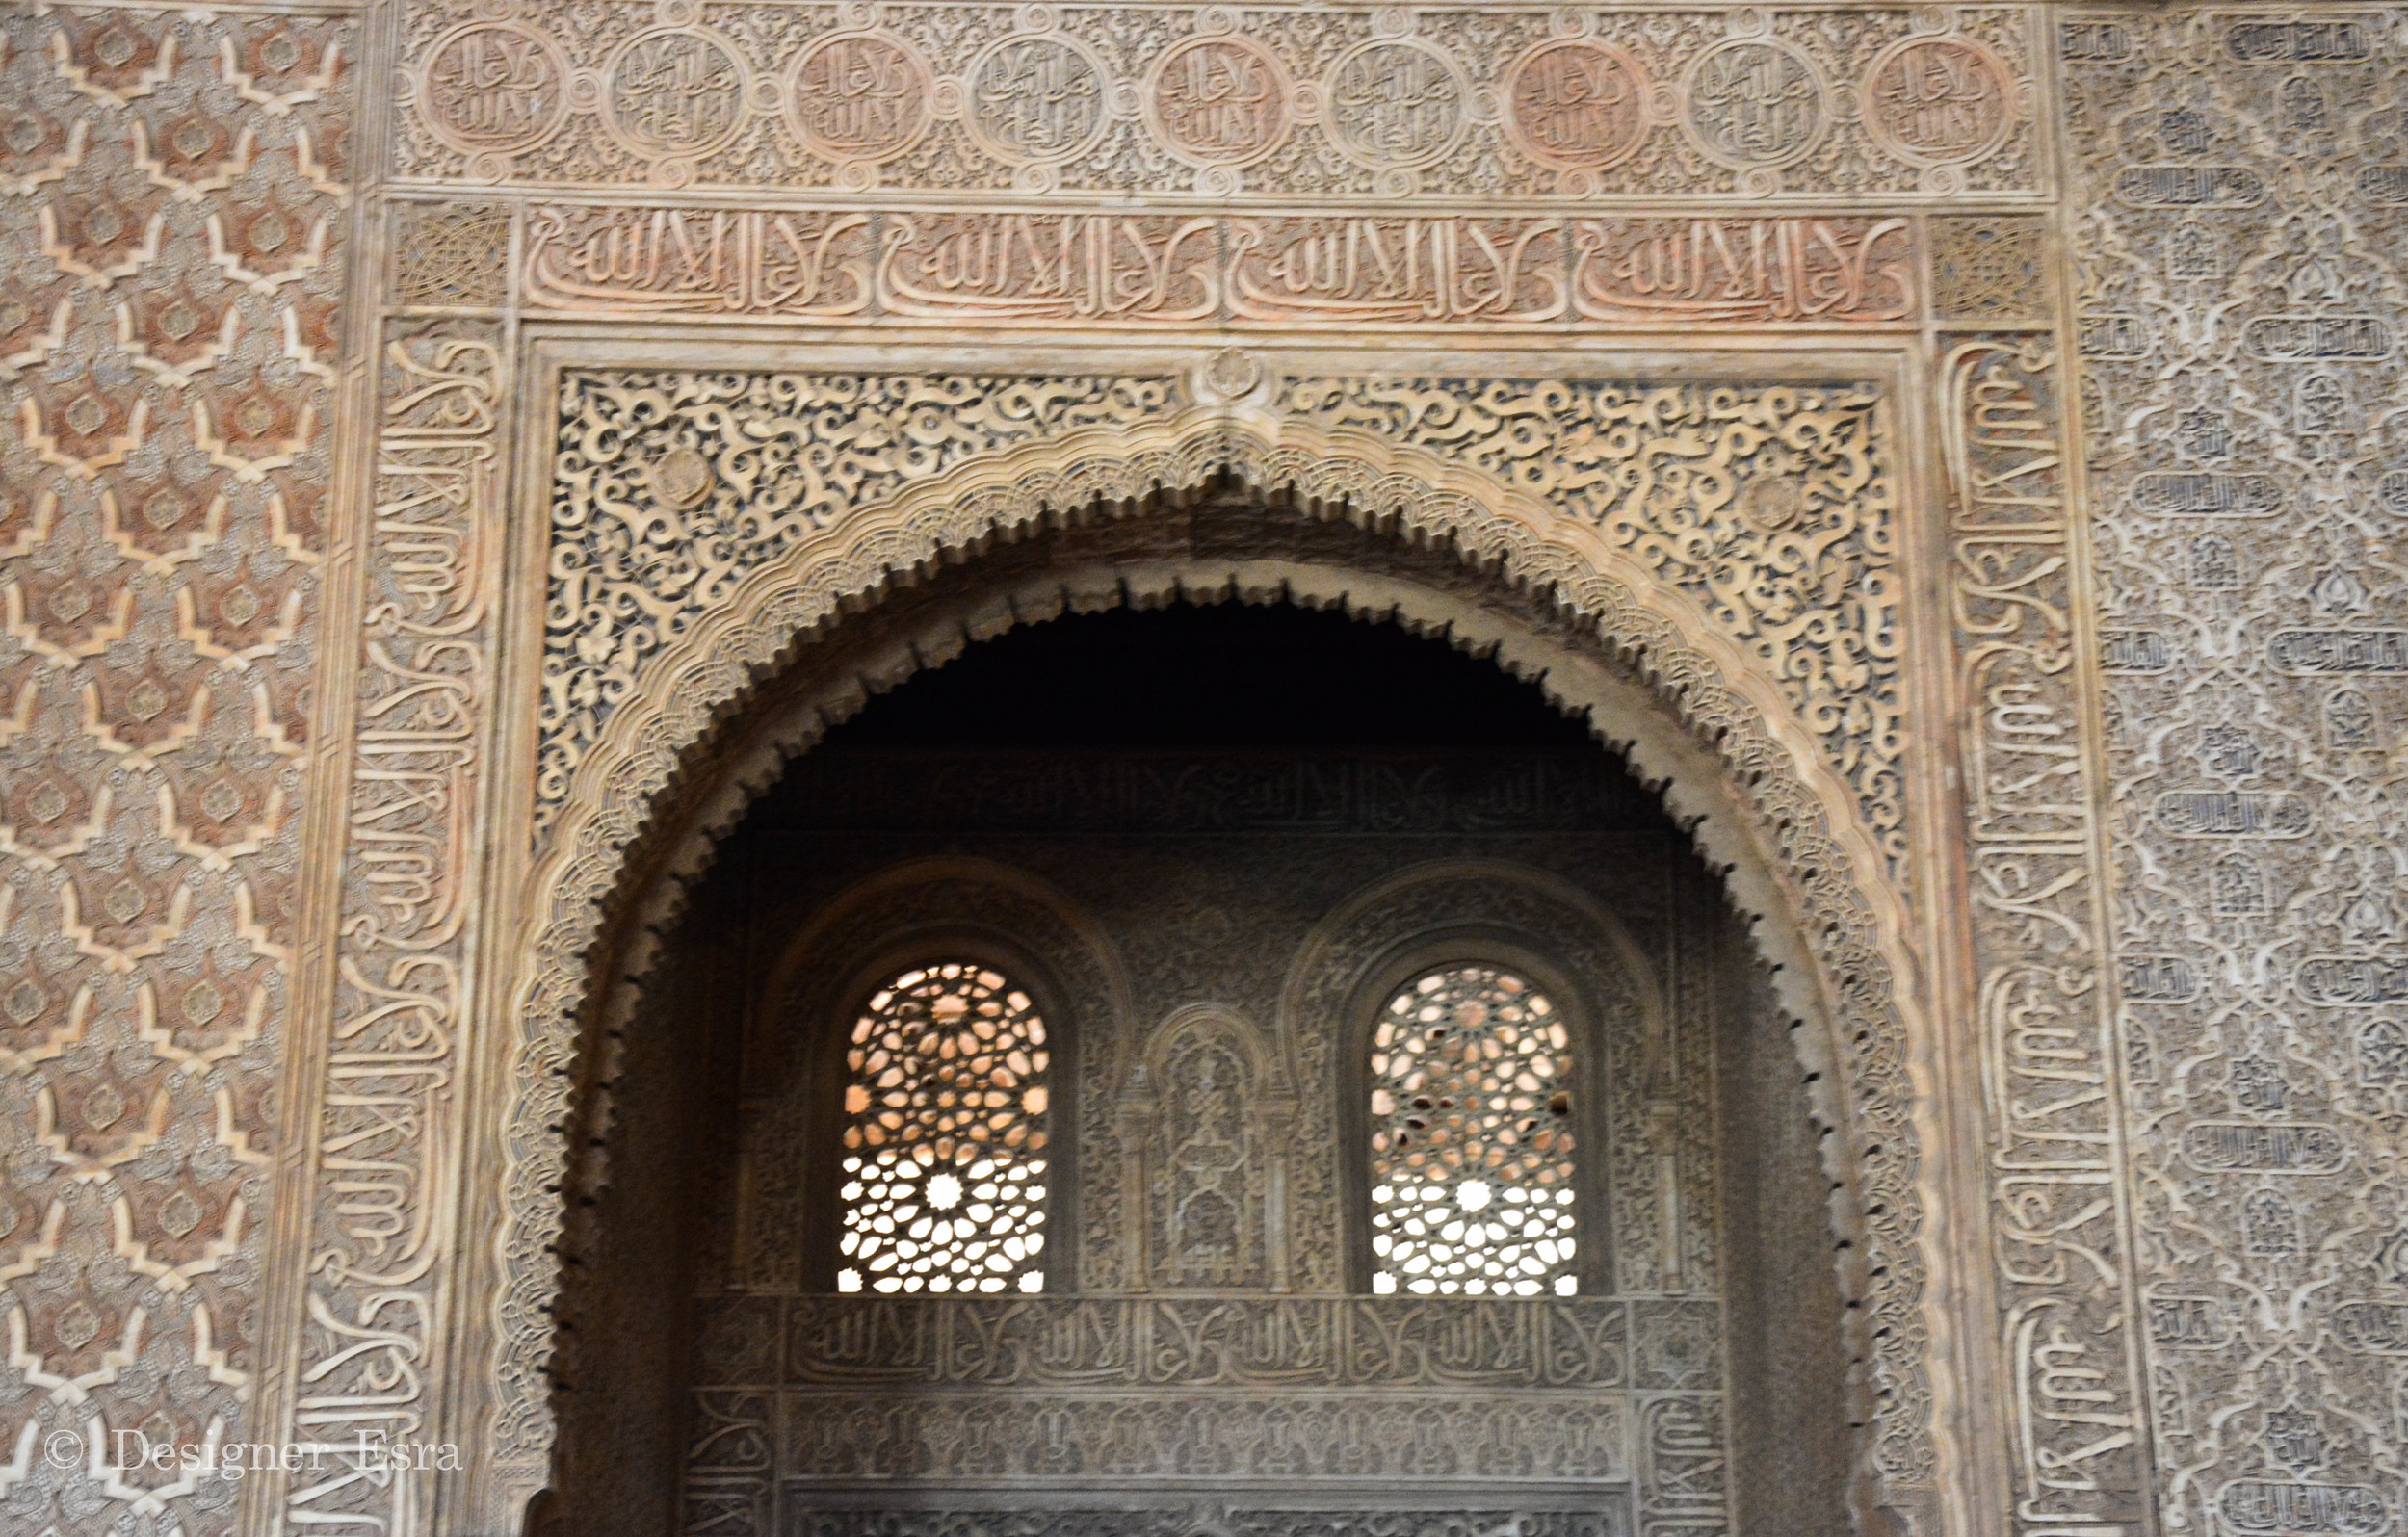 Windows and patterns in Islamic Architecture